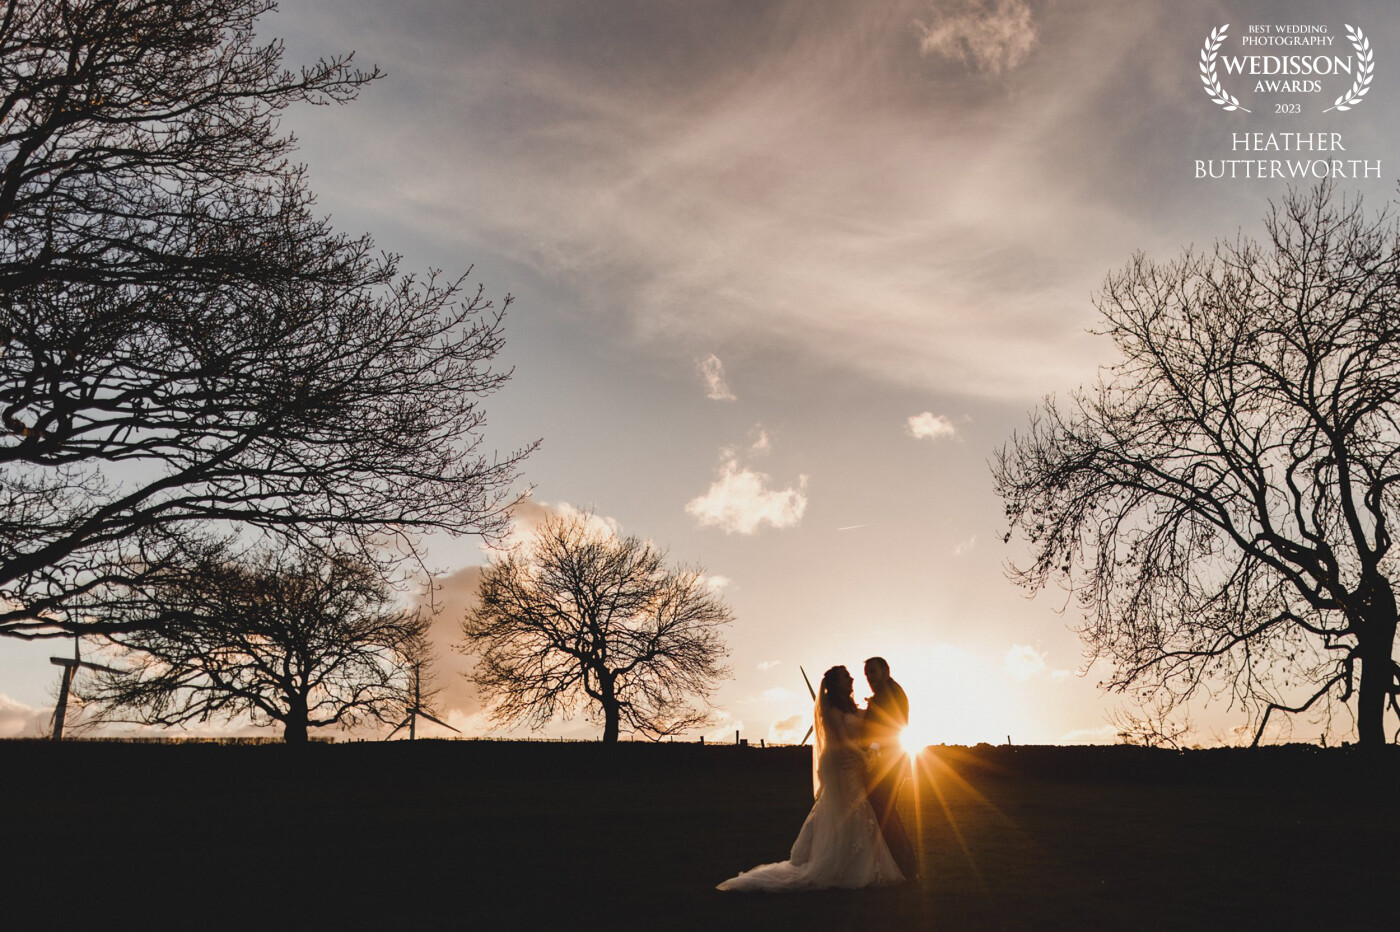 The sun was just starting to set so Hannah and Jason took at little walk through the field at Spicer Manor and I captured this beautiful photograph of them just before the sunset behind them. They then went happily back off to their puddings!